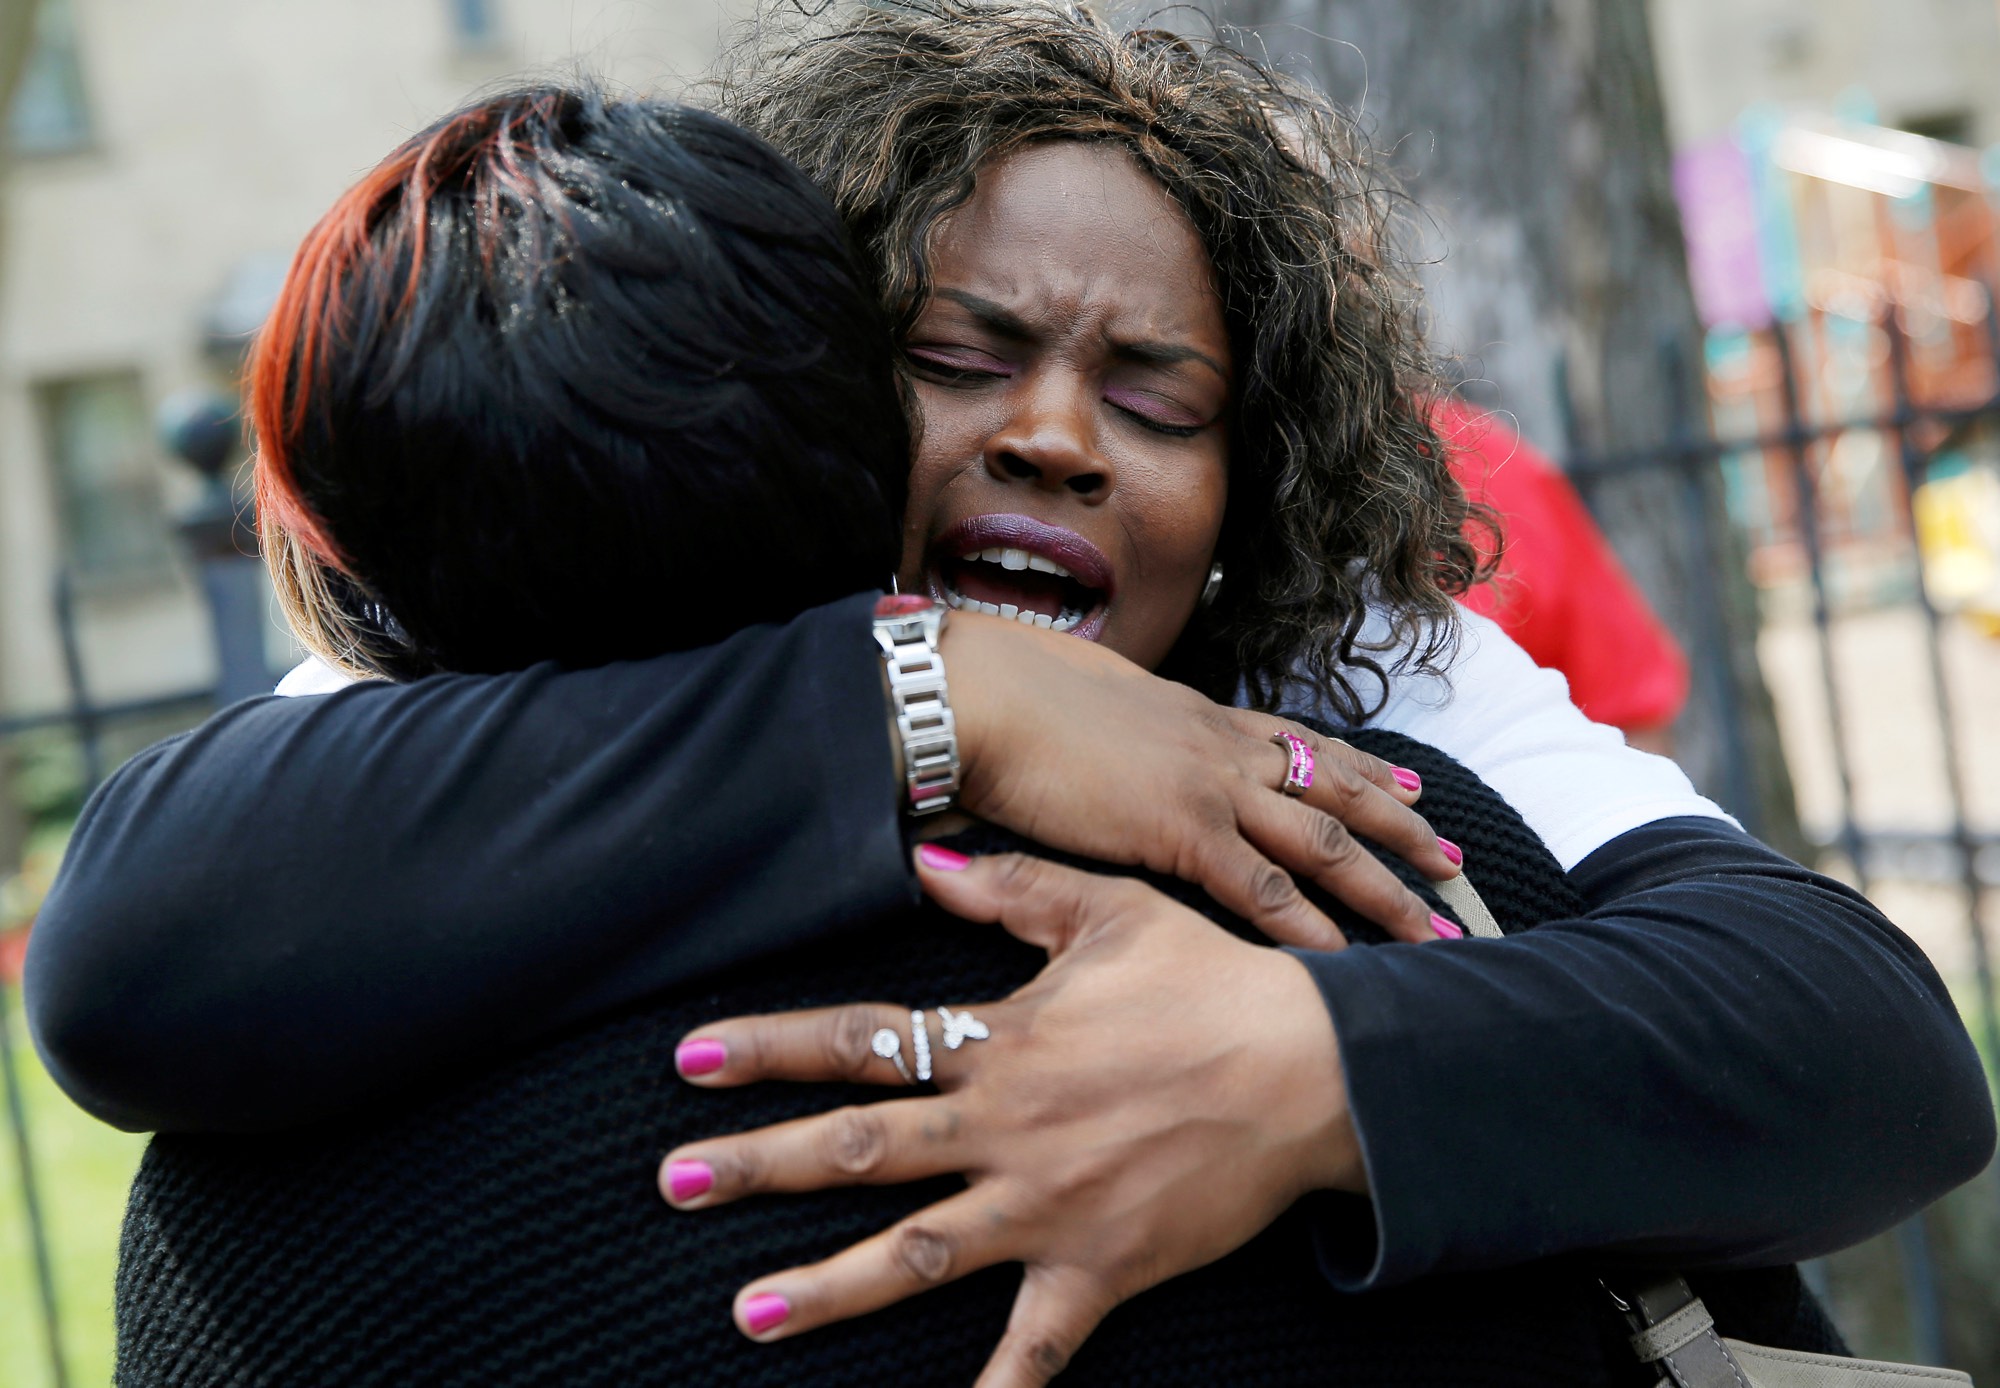 Nortasha Stingiey (R) hugs Lutrice Boyd at a "Purpose over Pain" gathering. The group of mothers who lost children to gun violence are calling for a stop to shootings in Chicago. May 6, 2016. REUTERS/Jim Young